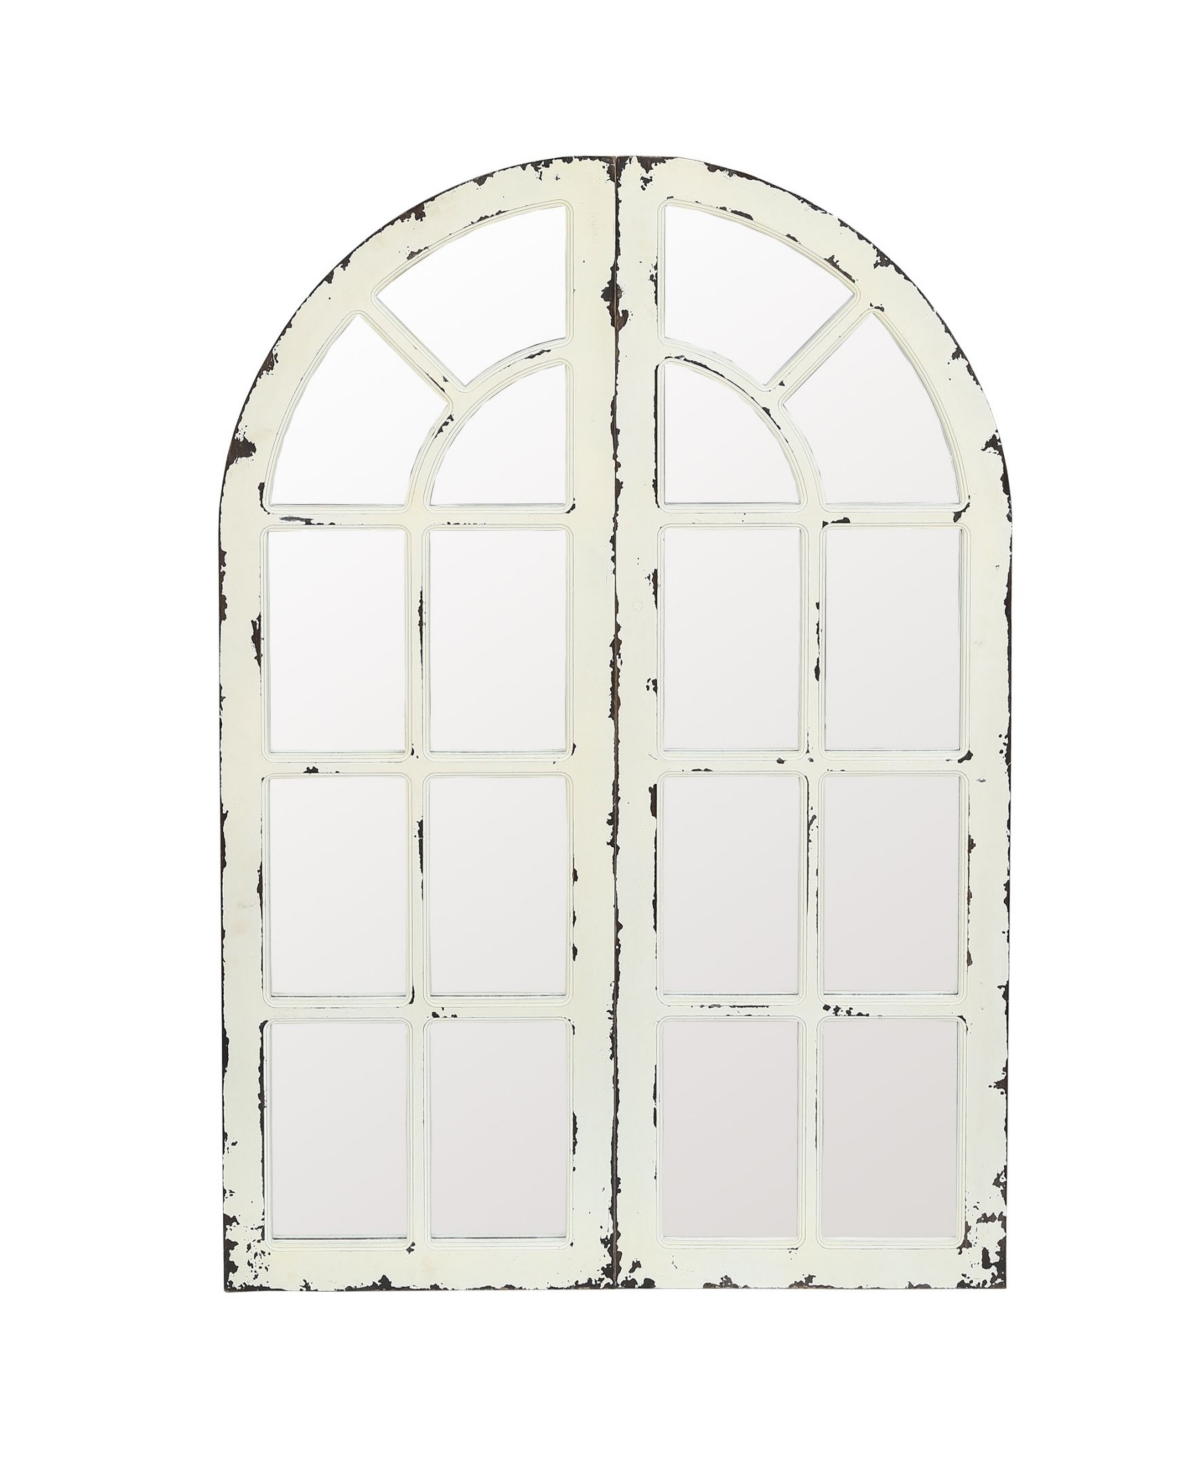 Set of 2 Wood Frame Window Panels with Mirror - Off-white